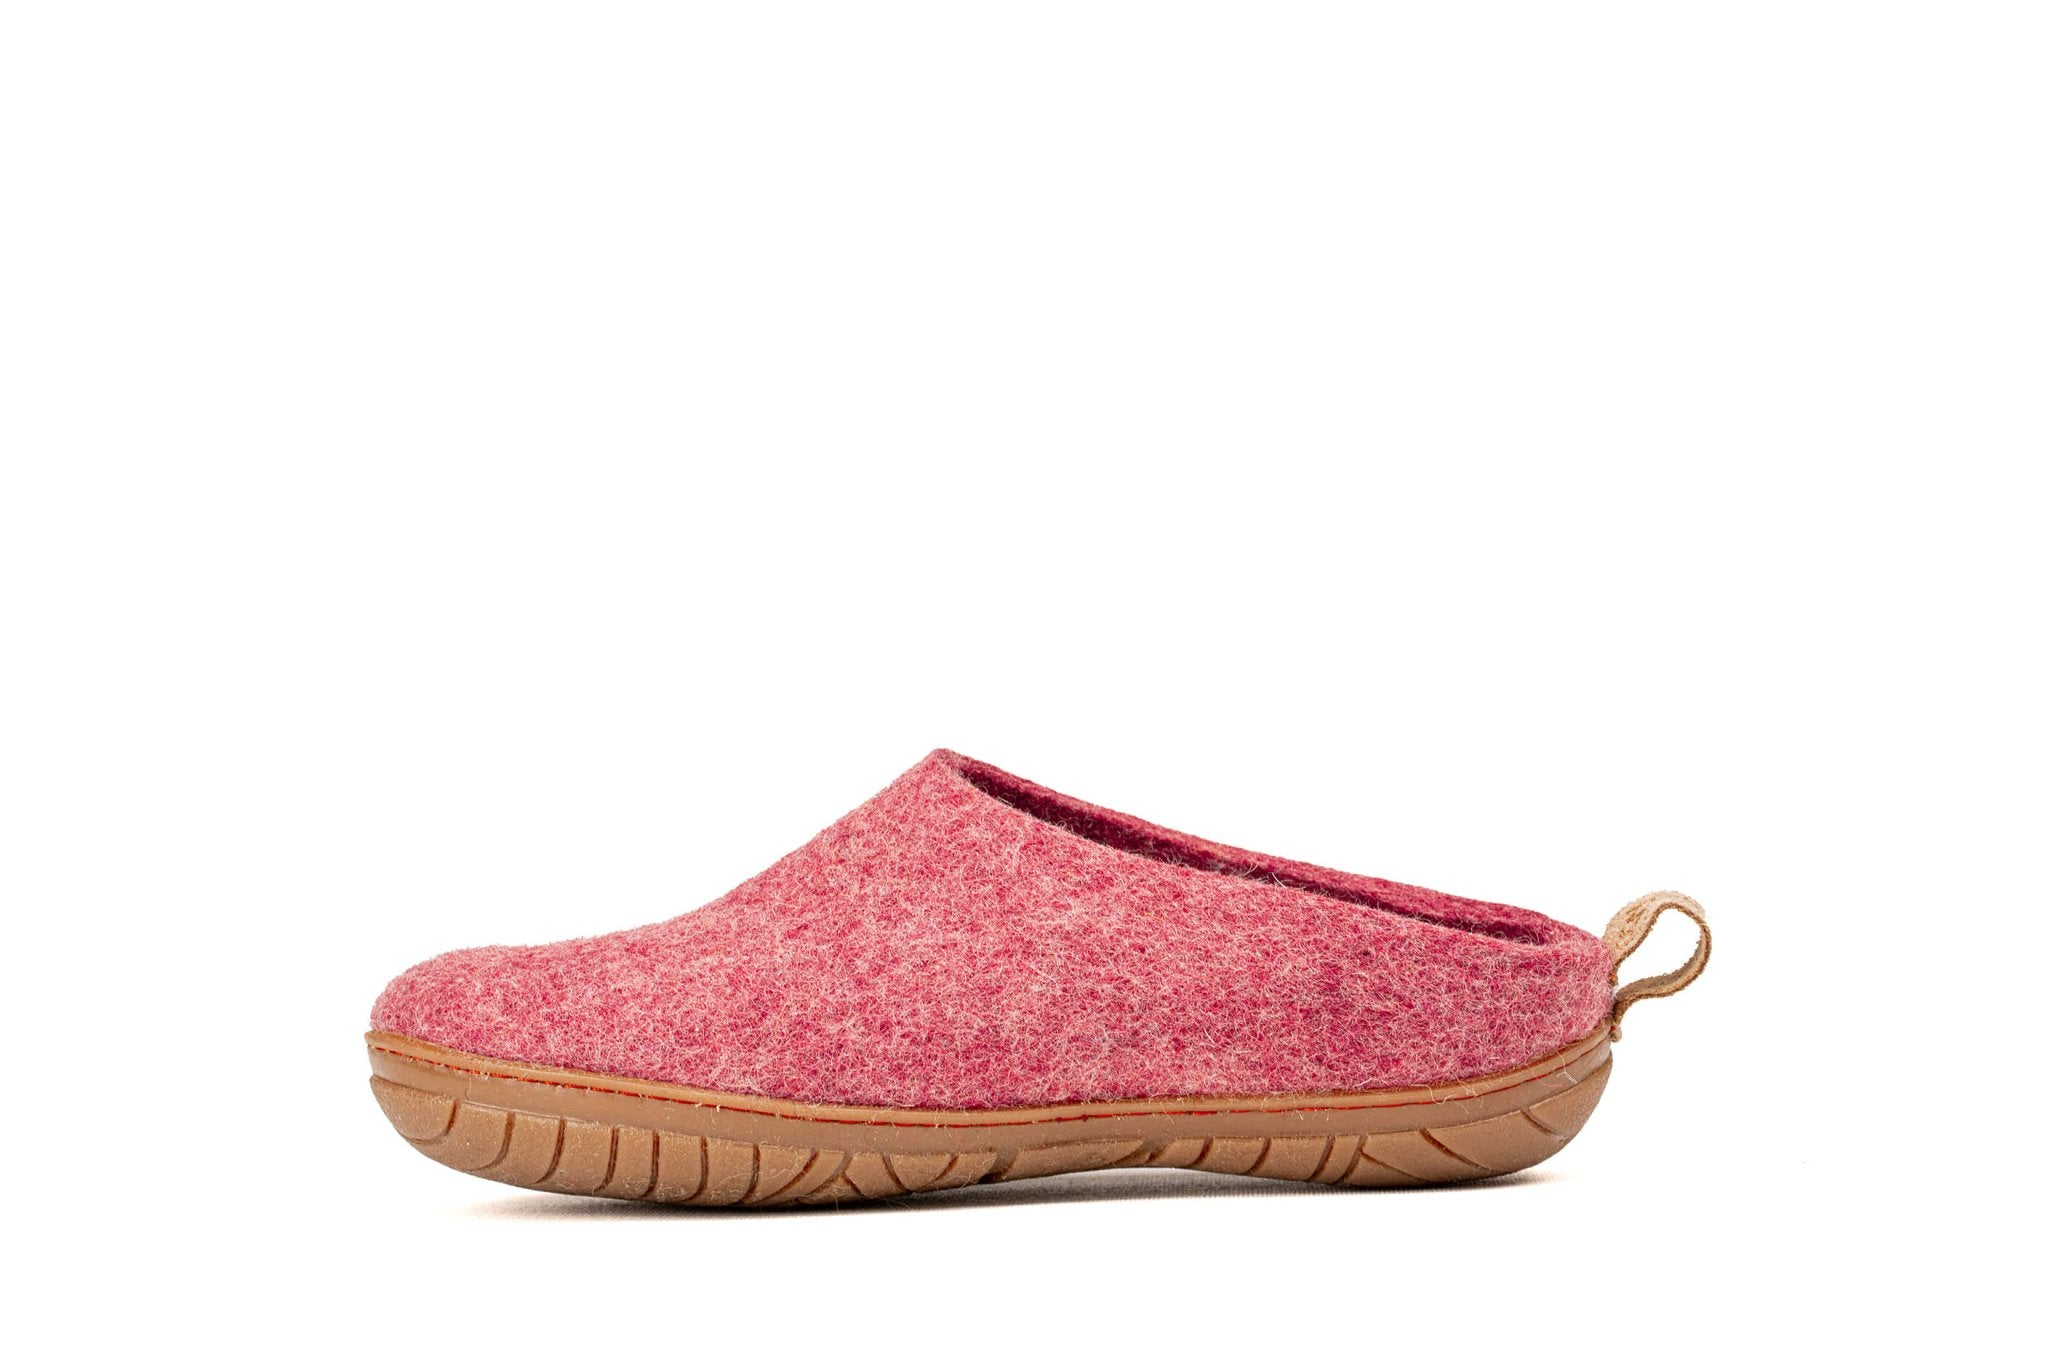 Outdoor Open Heel Slippers With Rubber Sole - Cherry Pink - Woollyes